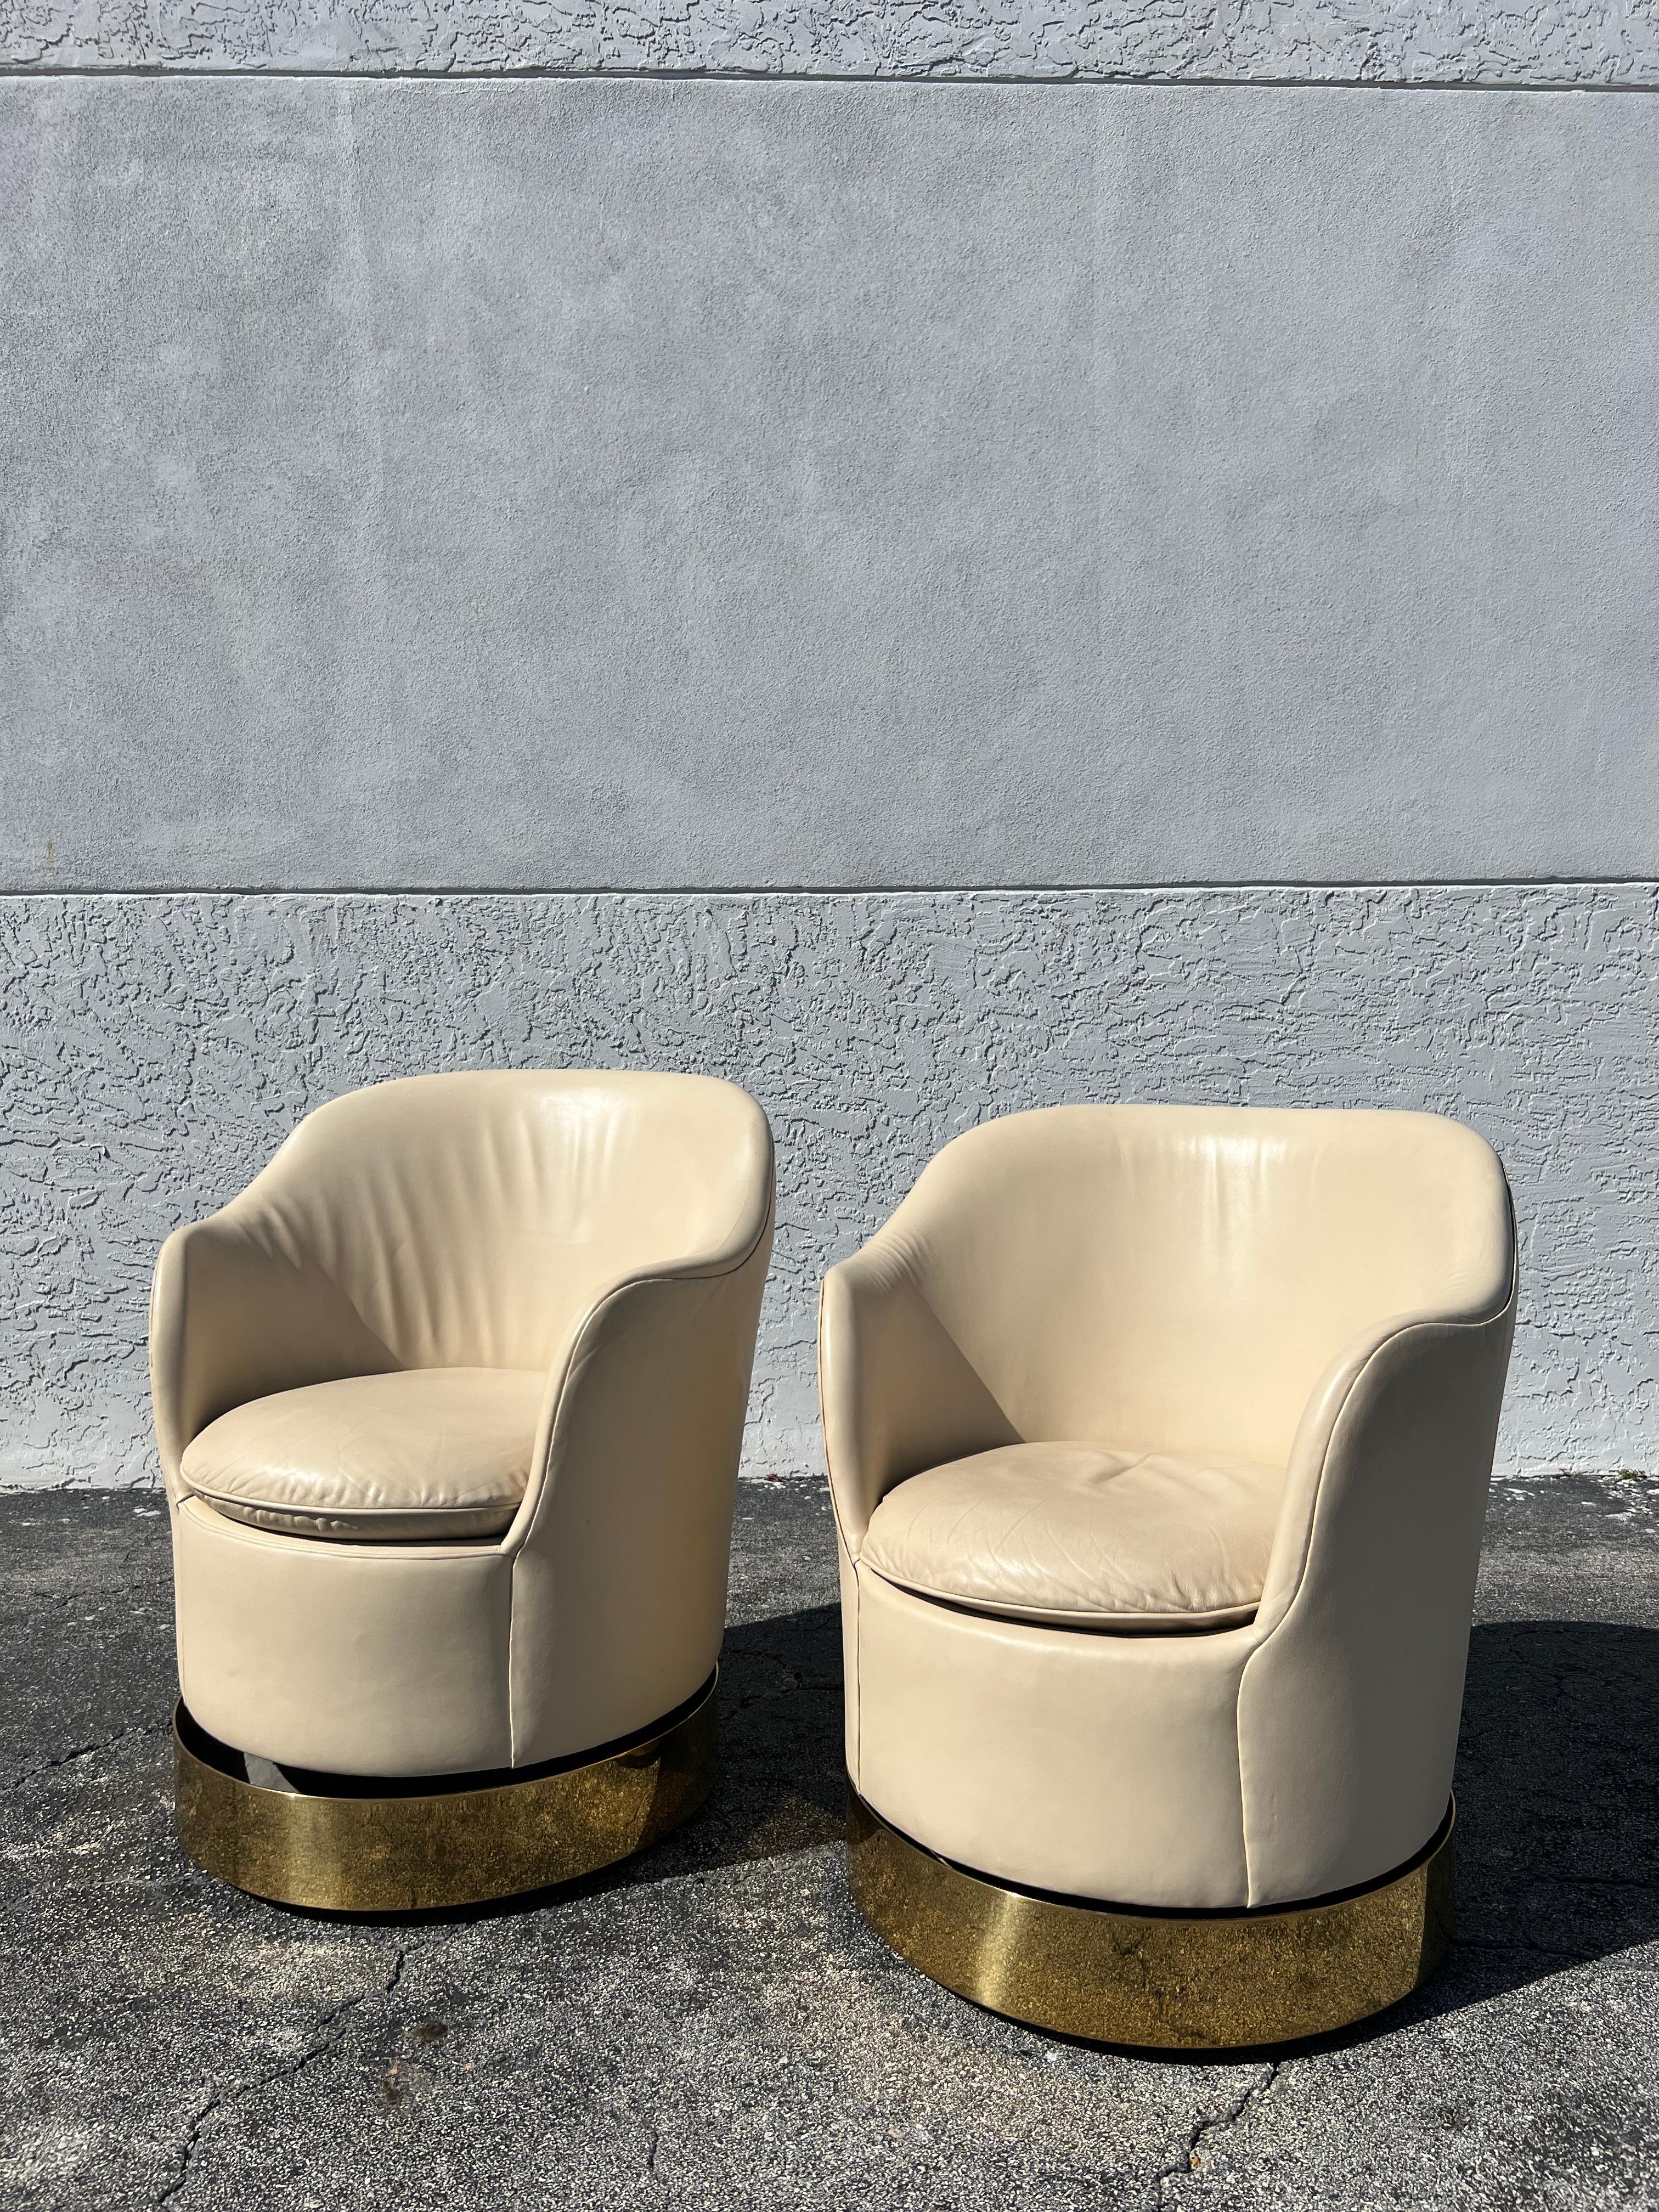 Pair of Phillip Enfield brass swivel lounge chairs. The chairs swivel and tilt, the bases are also on wheels. The chairs are adjustable in height, however the bases must be removed to perform this. We have not adjusted them, so the heights vary